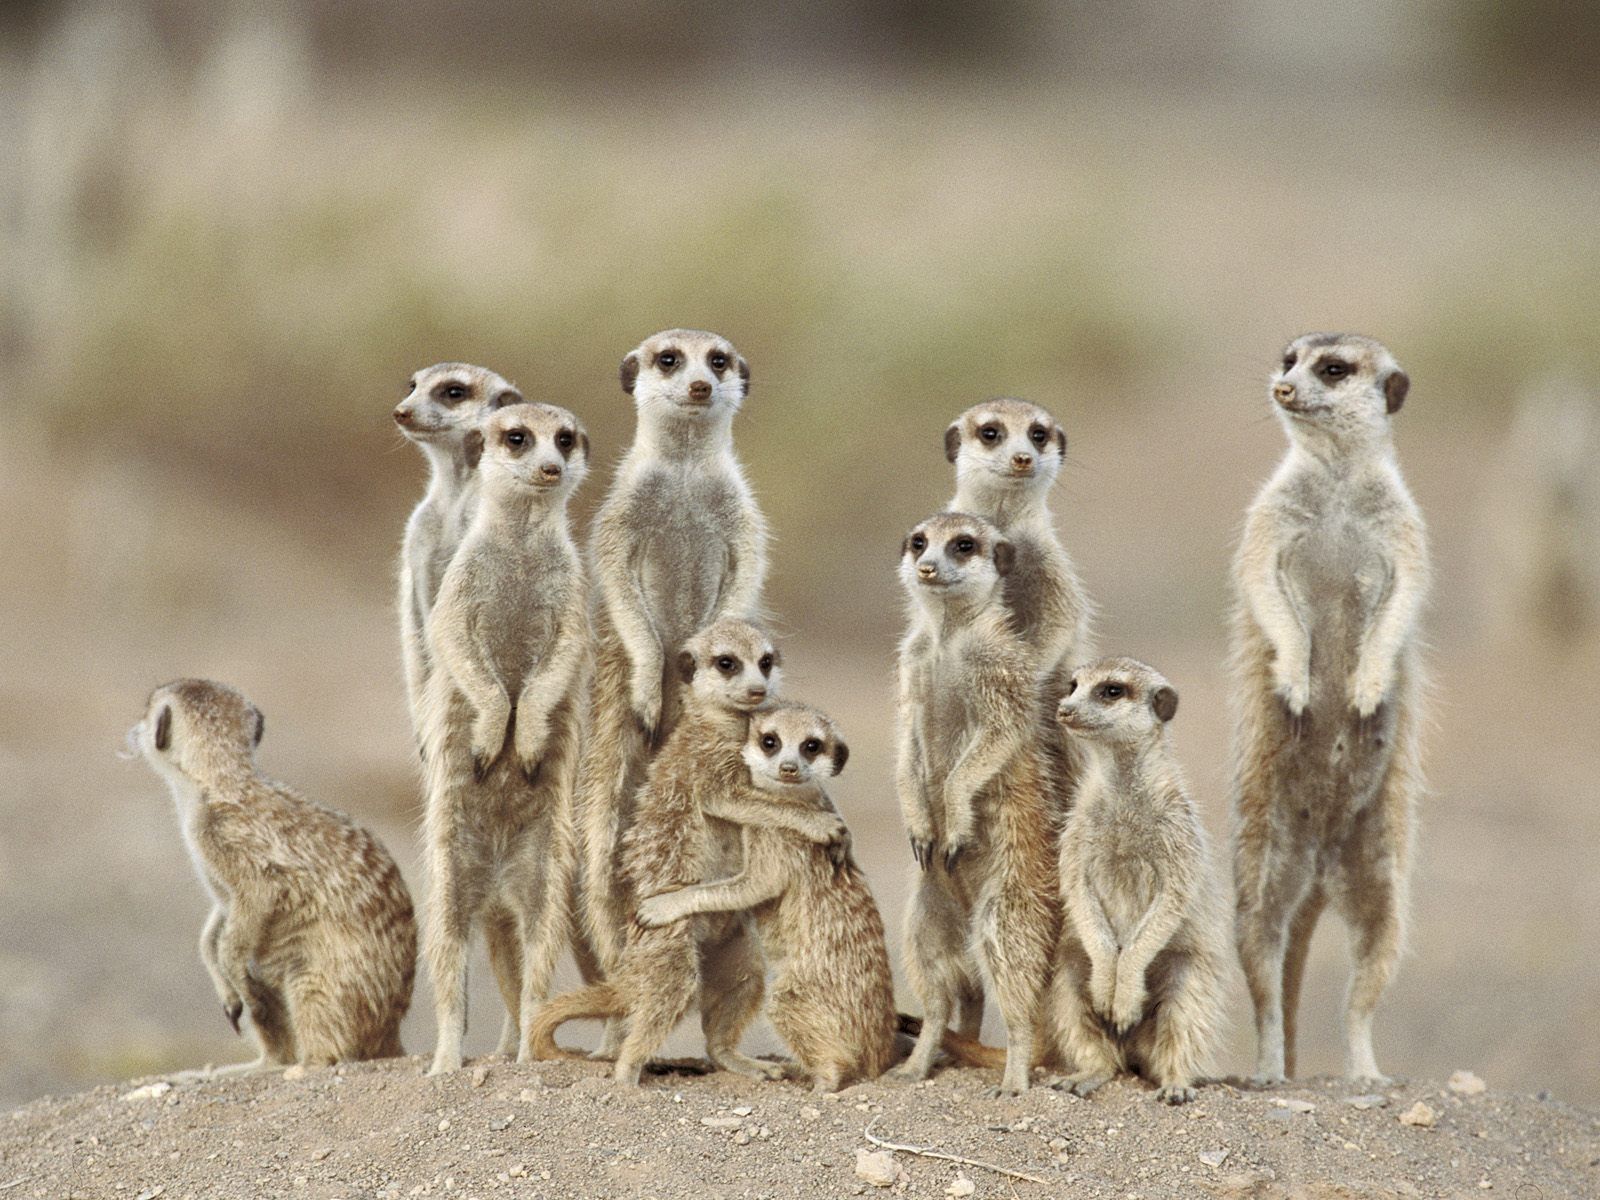 Are you an ostrich or meerkat manager? – 5-Dimensionz